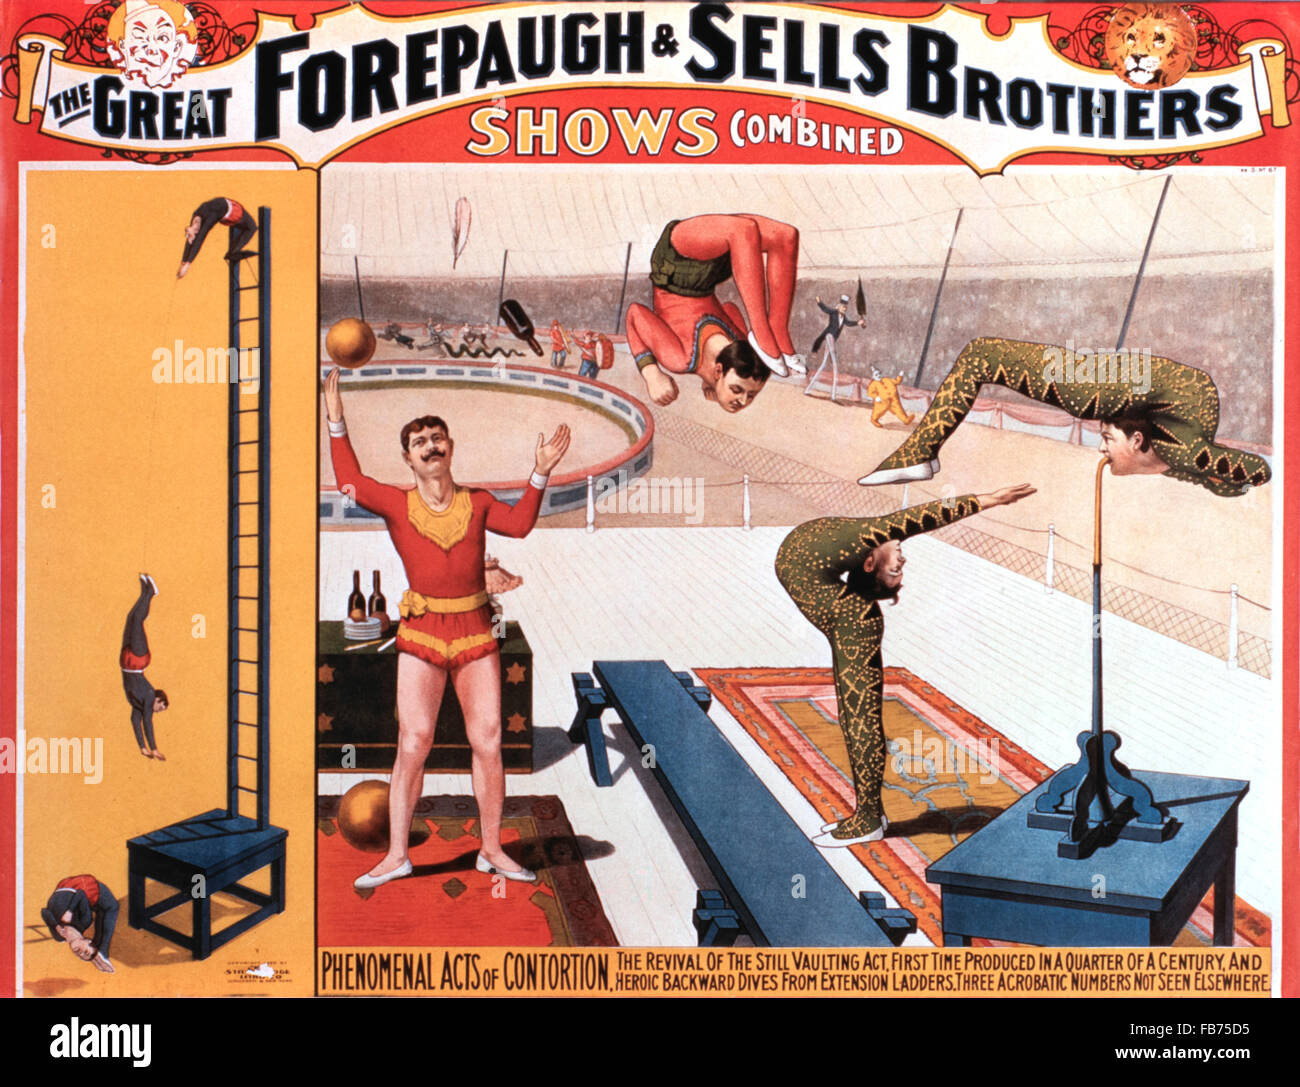 Great Forepaugh and Sells Brothers Shows Combined, Phenomenal Acts of Contortion, Circus Poster, circa 1900 Stock Photo